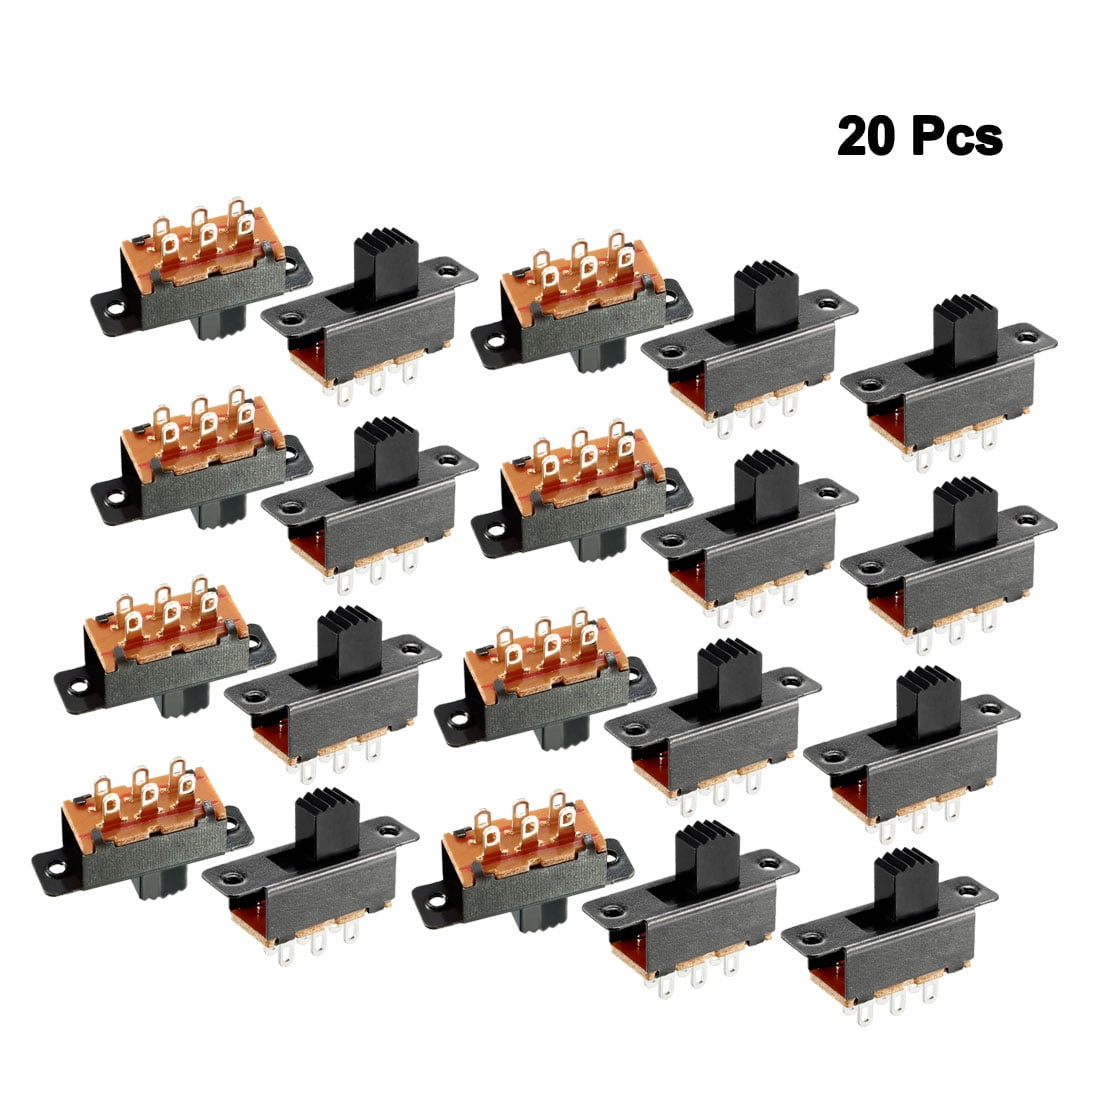 uxcell 20Pcs 5mm Vertical Slide Switch DPDT 6 Terminals PCB Panel Latching